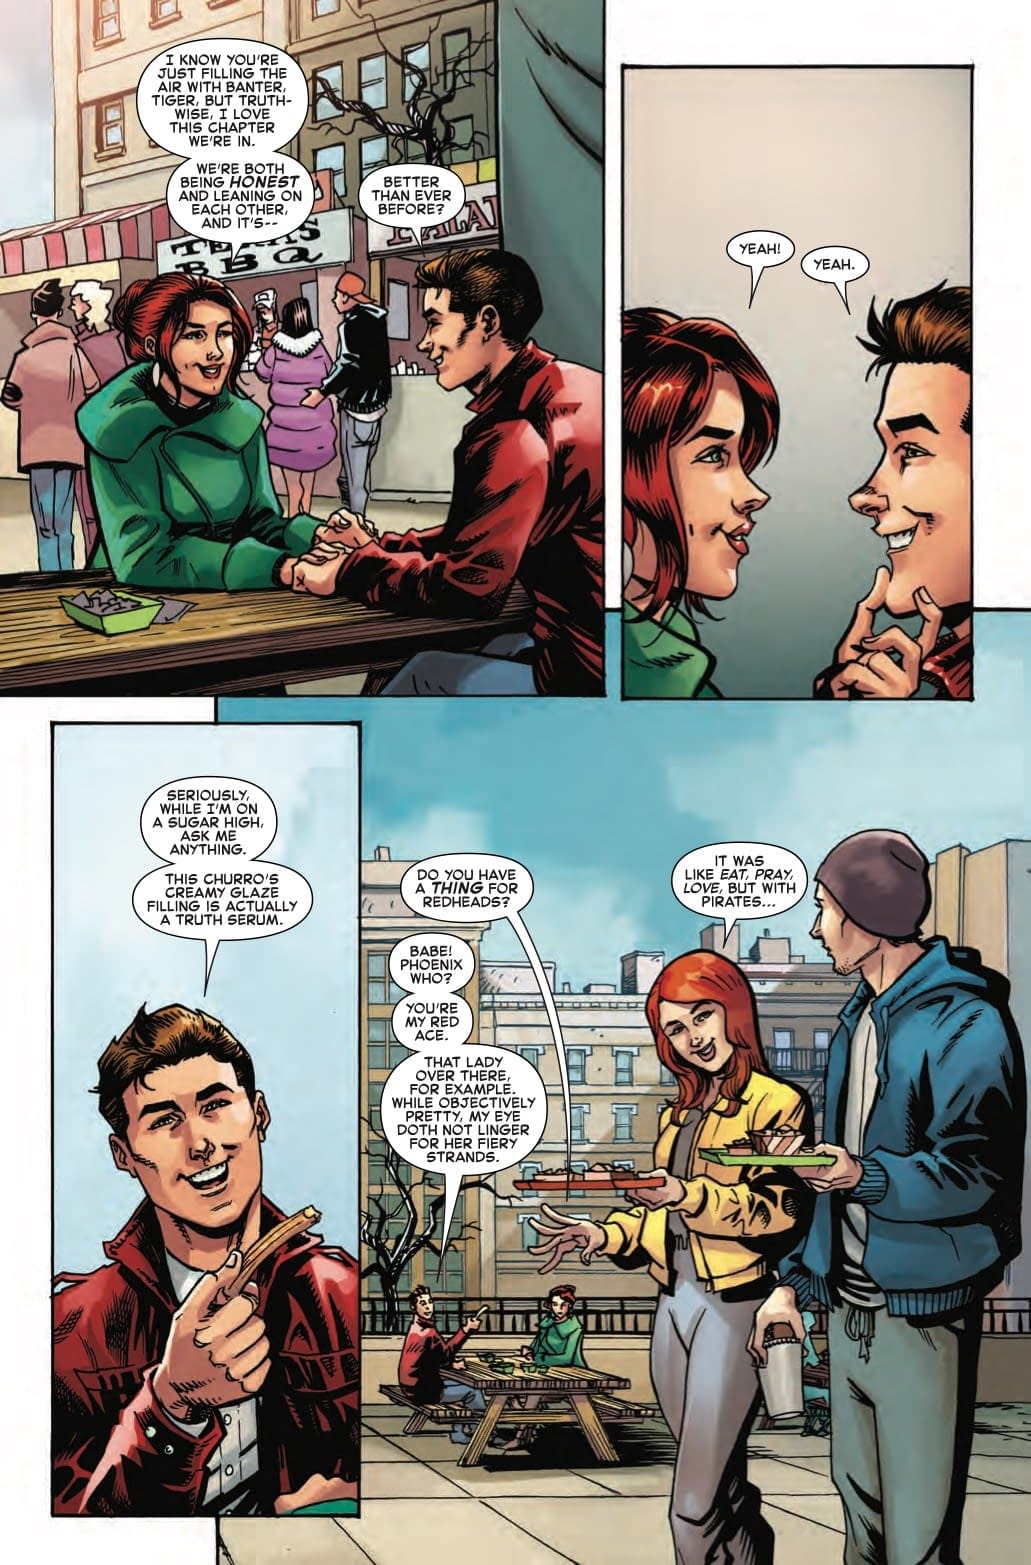 Spider-Man Discusses His Thing for Redheads in Next Week's Iceman #3